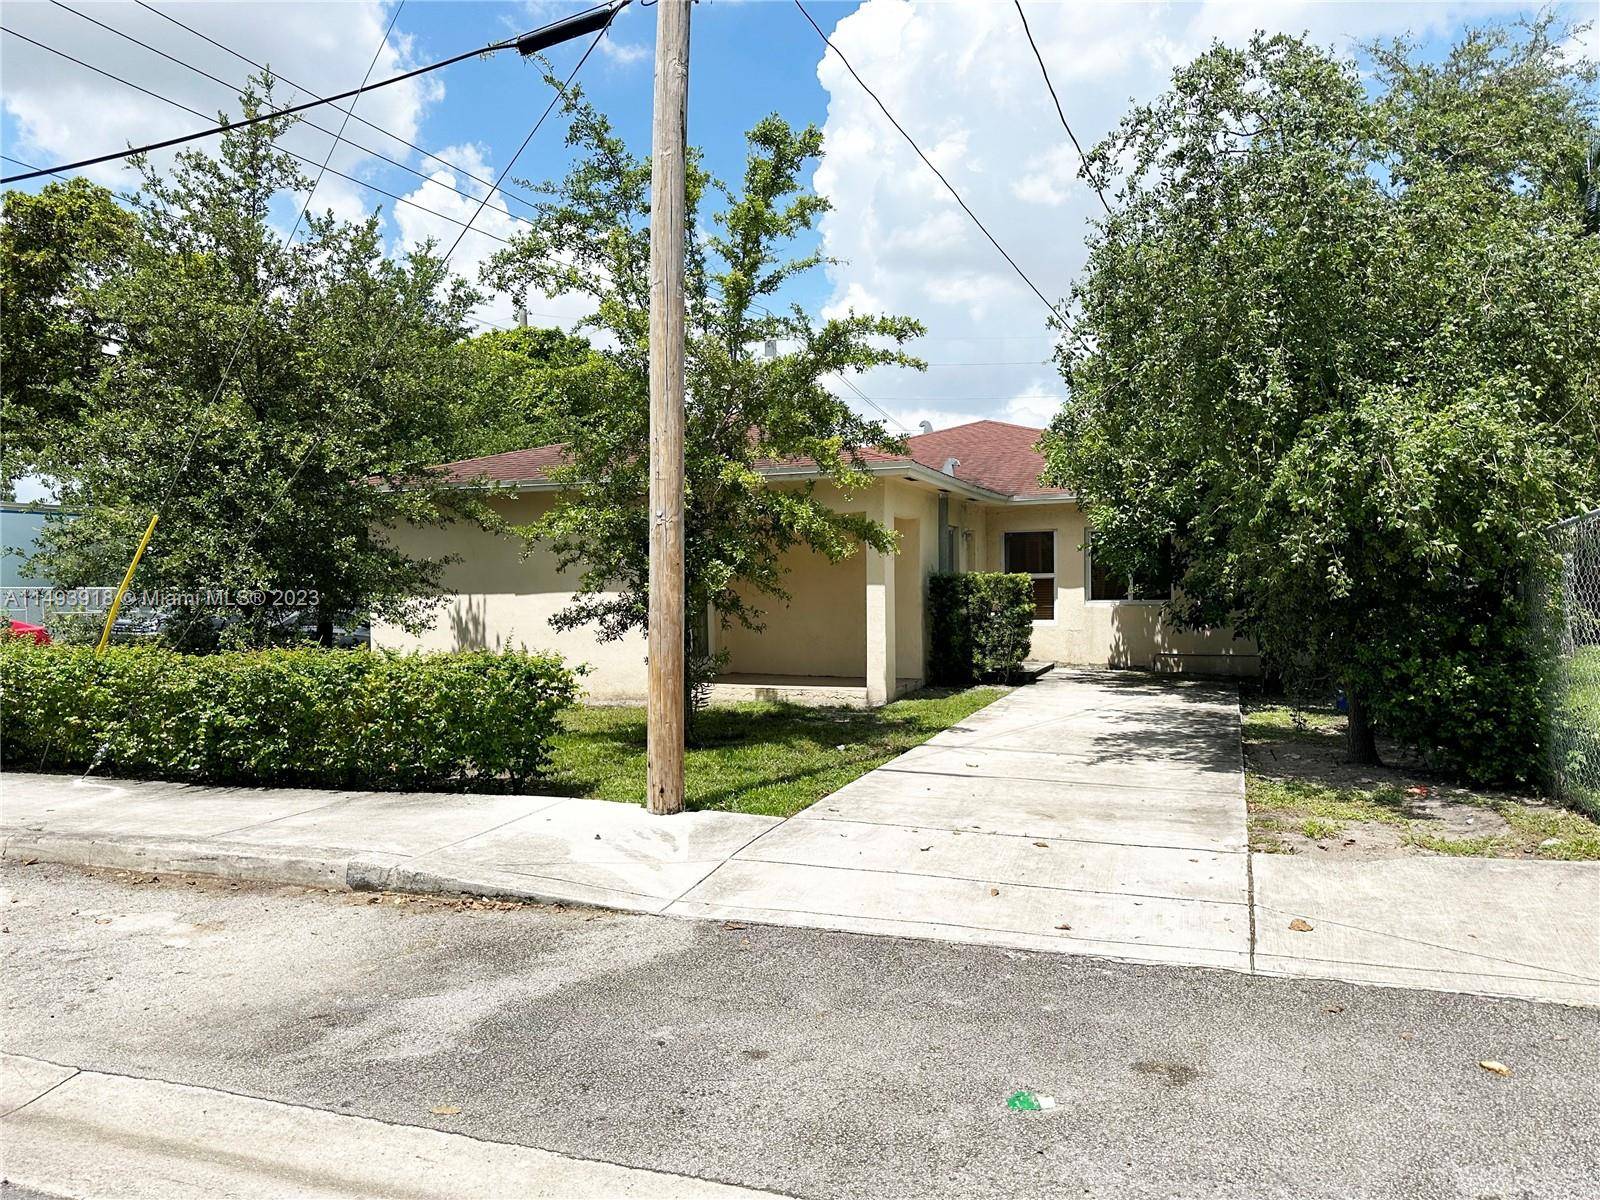 Beautiful 2 units with 3 bedroom 2 baths each with open kitchen, spacious living dining room, walk in closet, washer dryer, impact windows and 2 parking spaces.